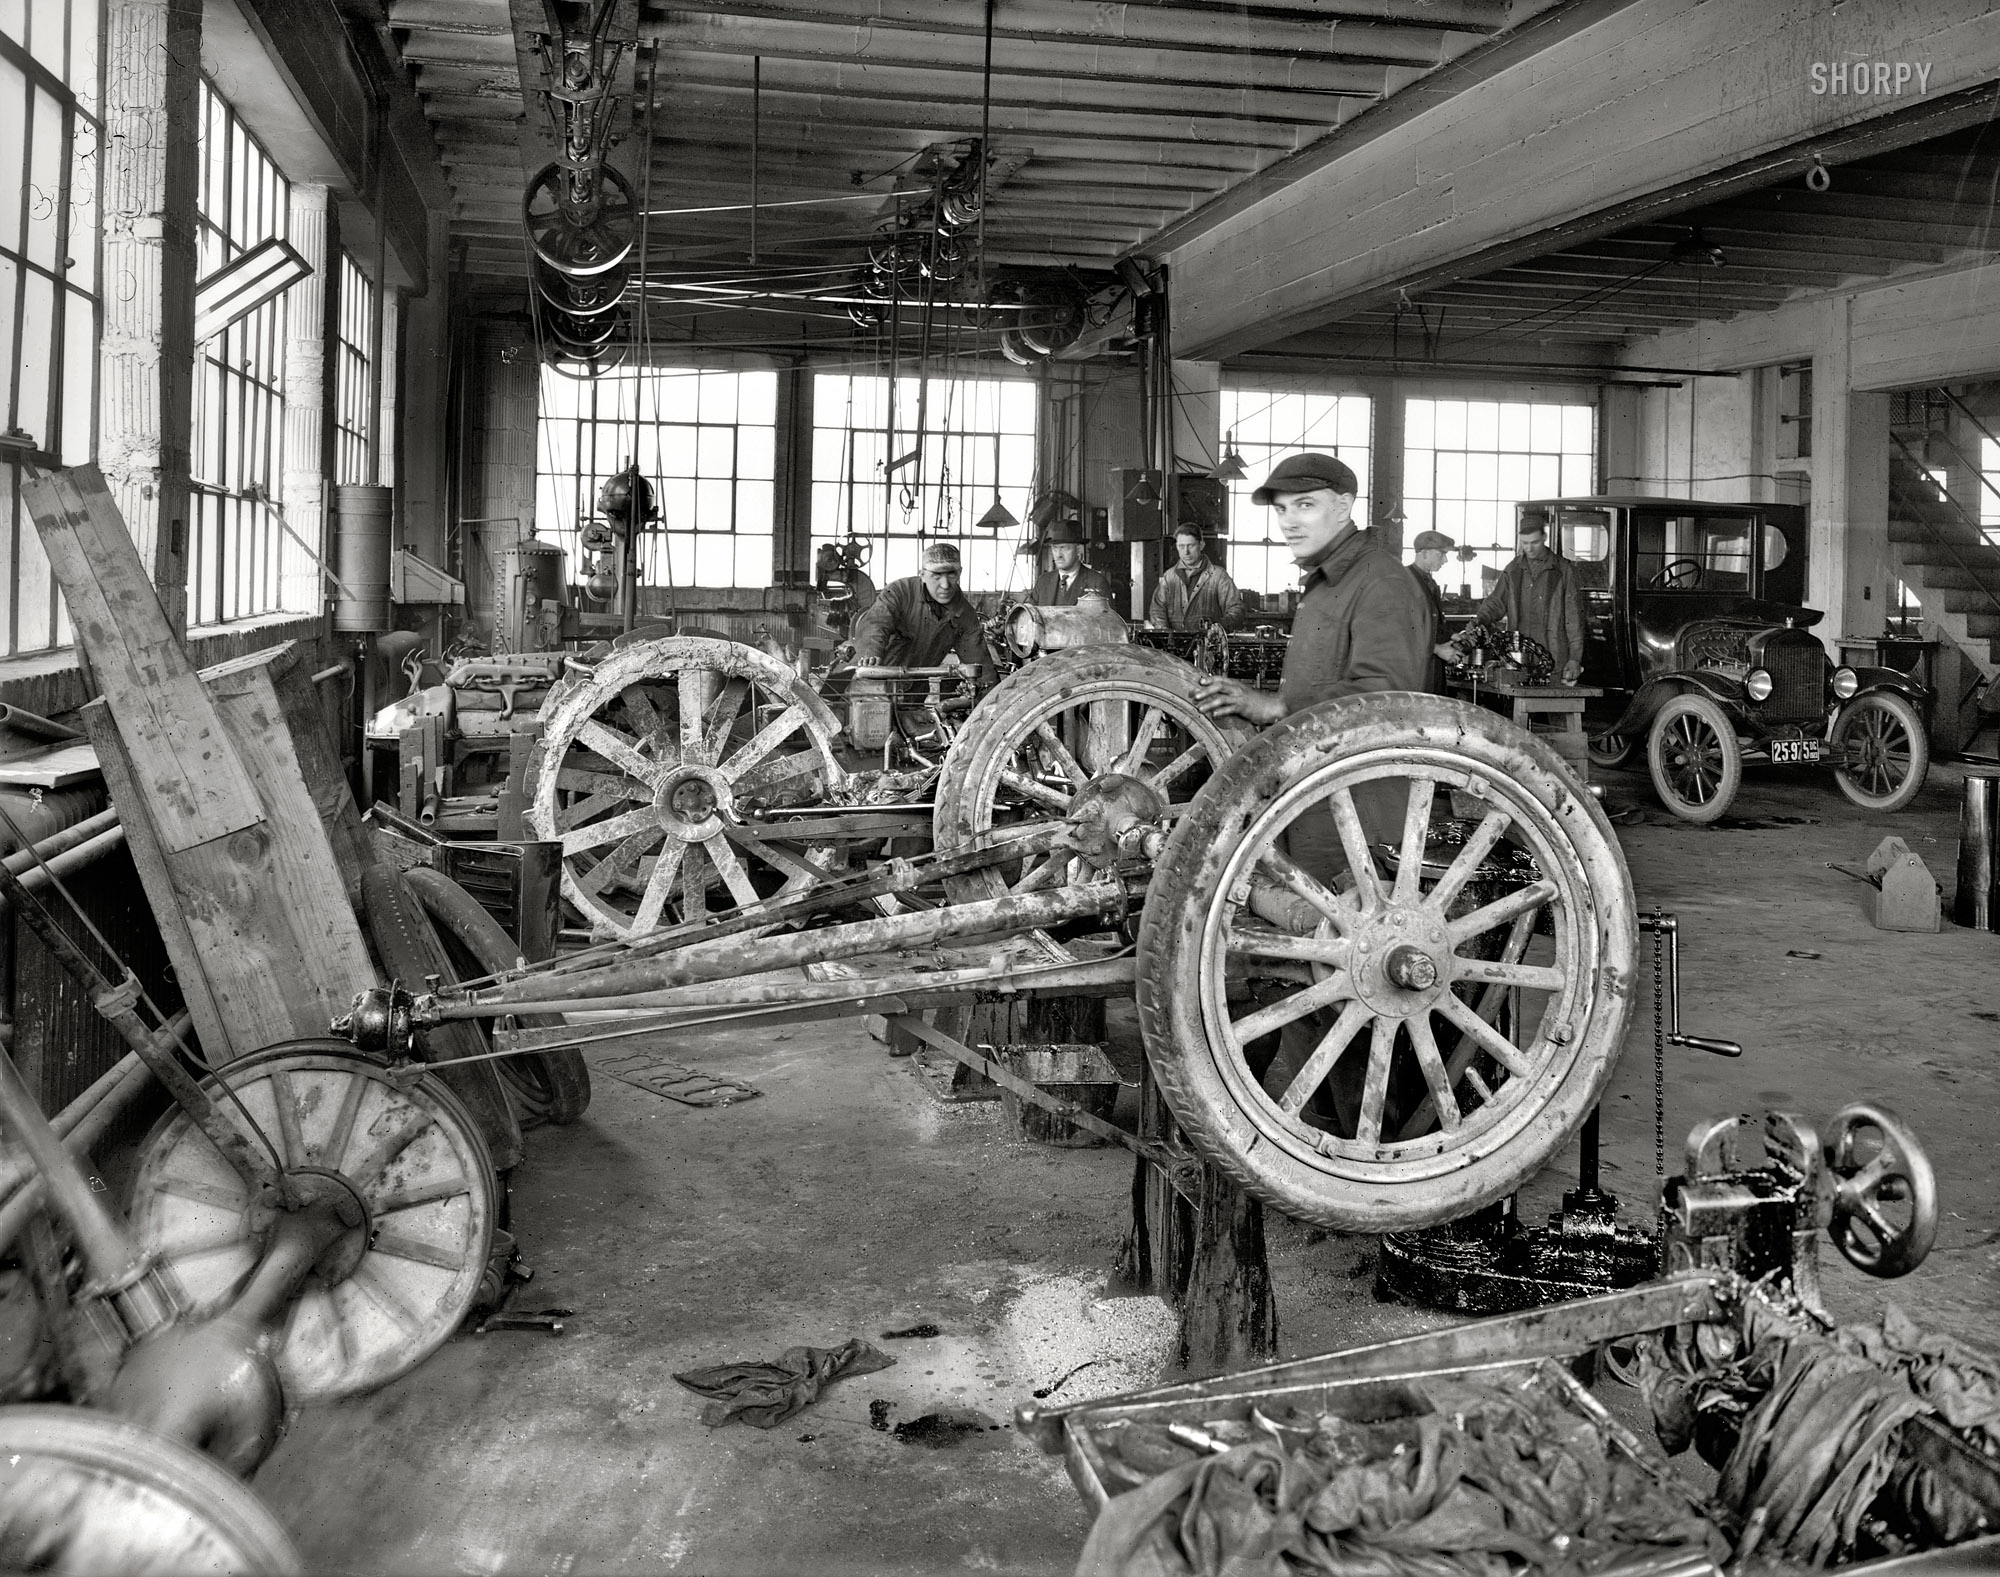 1923. "R.L. Taylor Motor Co." The service garage of this Washington, D.C., Ford dealer, seen earlier here. Here we are 20 years into the Motor Age yet this still has the look of your local Conestoga wagon repair shop. View full size.